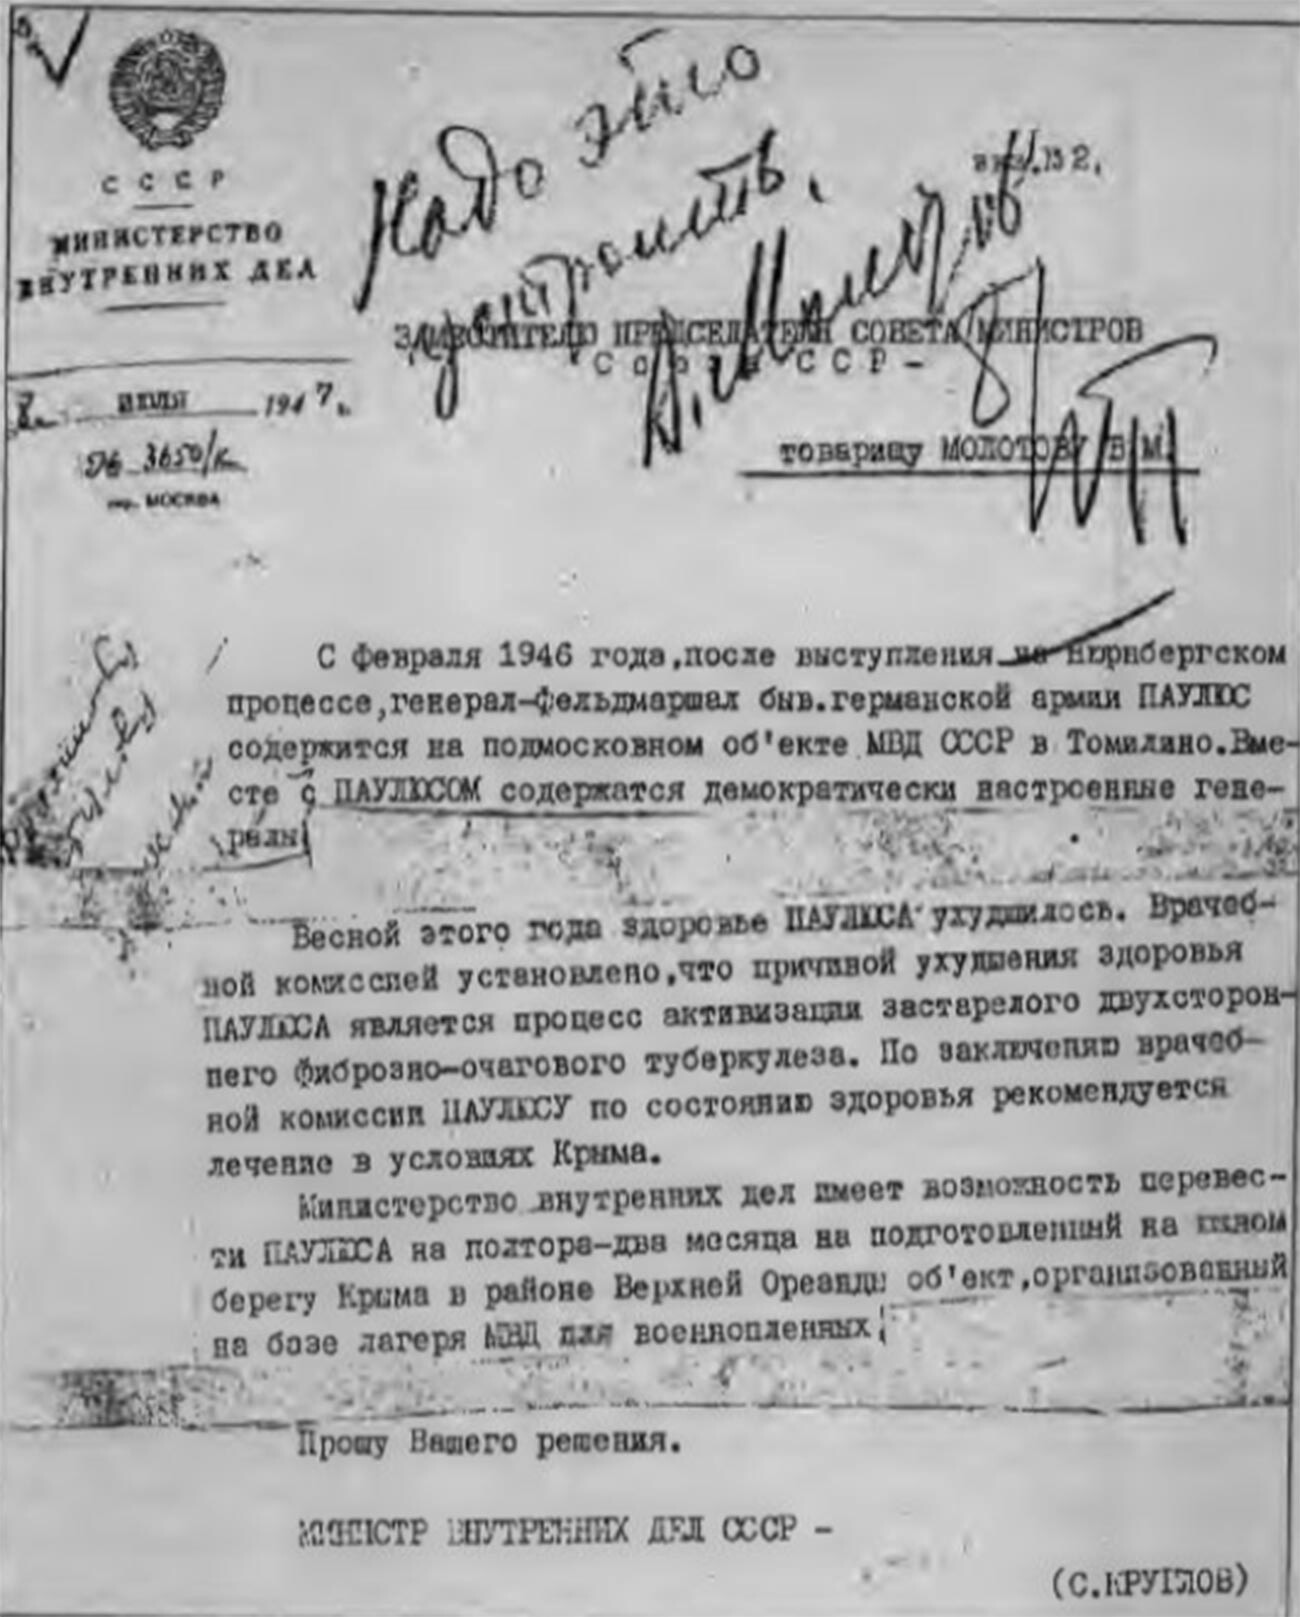 The Minister of Internal Affairs, Kruglov's note on Paulus' health and Molotov's handwritten commentary, 